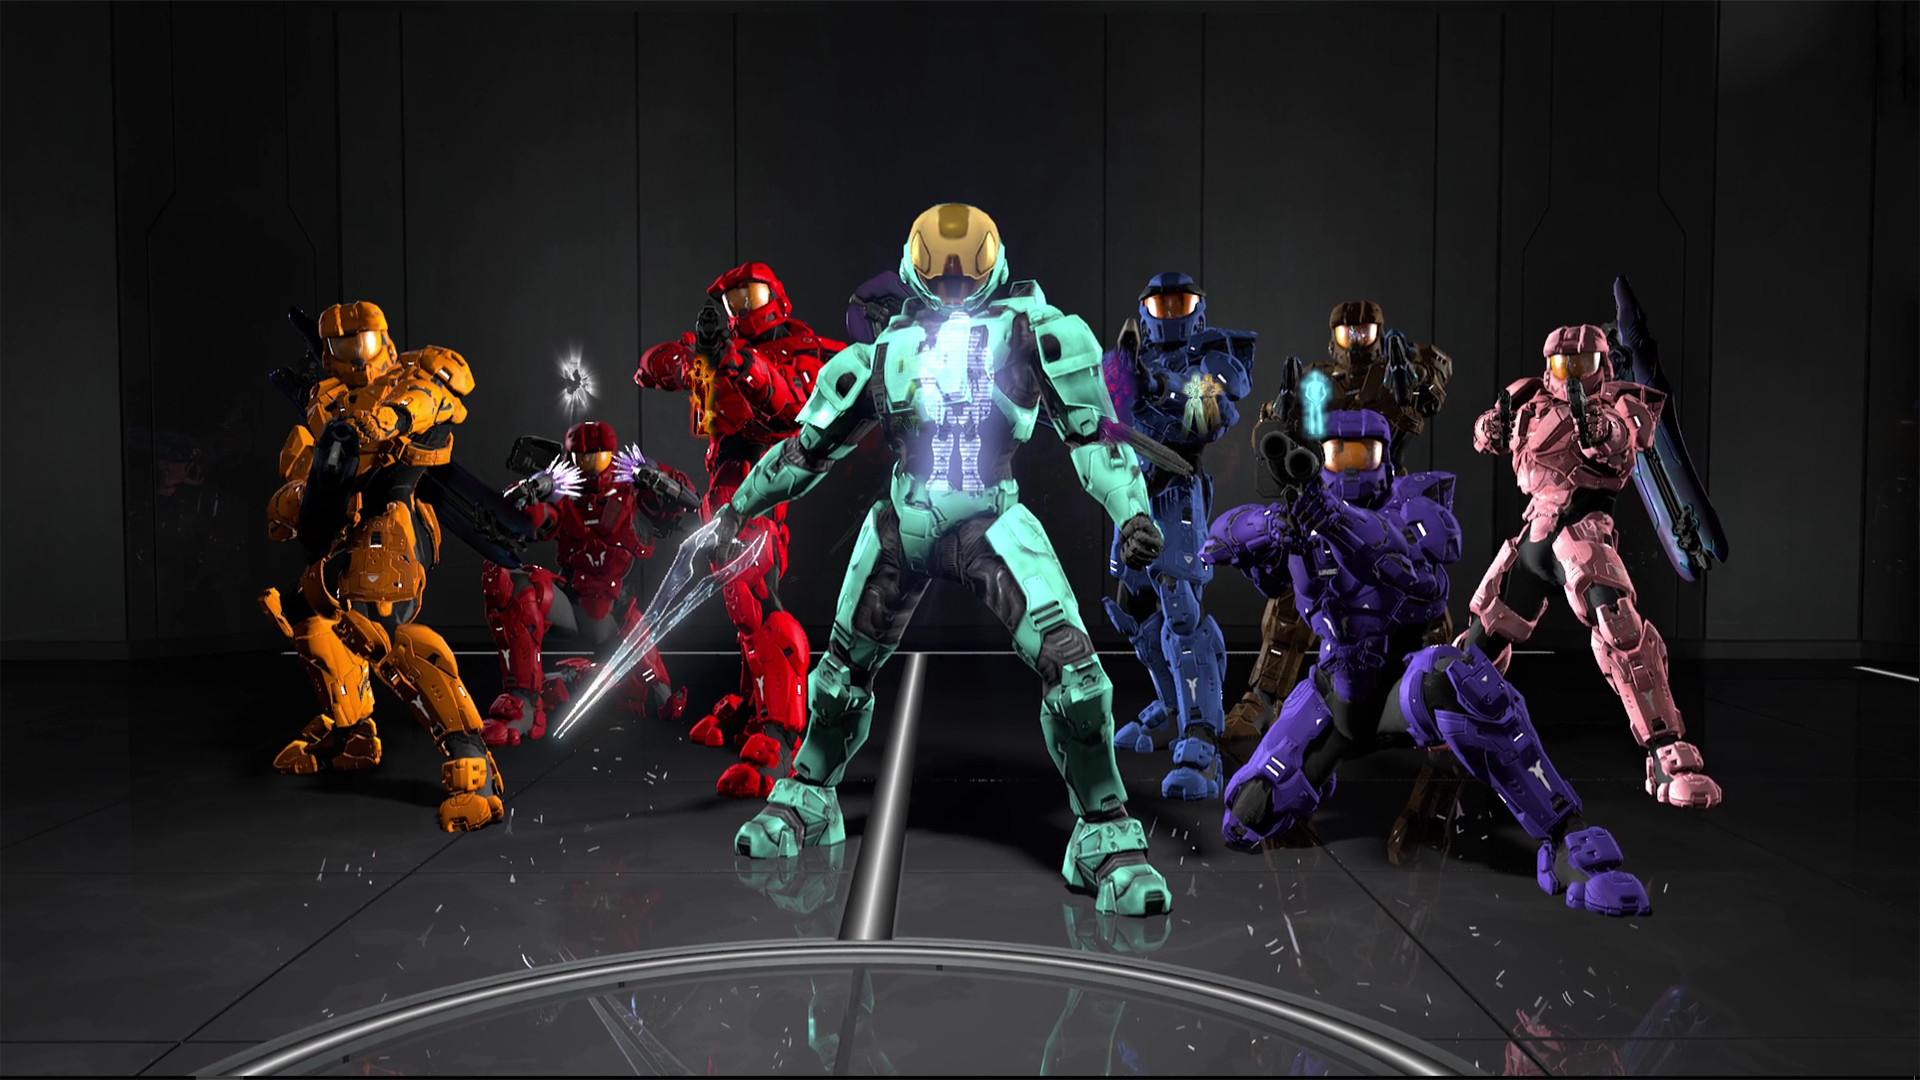 Wallpaper - WallpaperSafari SO EPIC RED VS BLUE by Overlordflinx on Deviant...